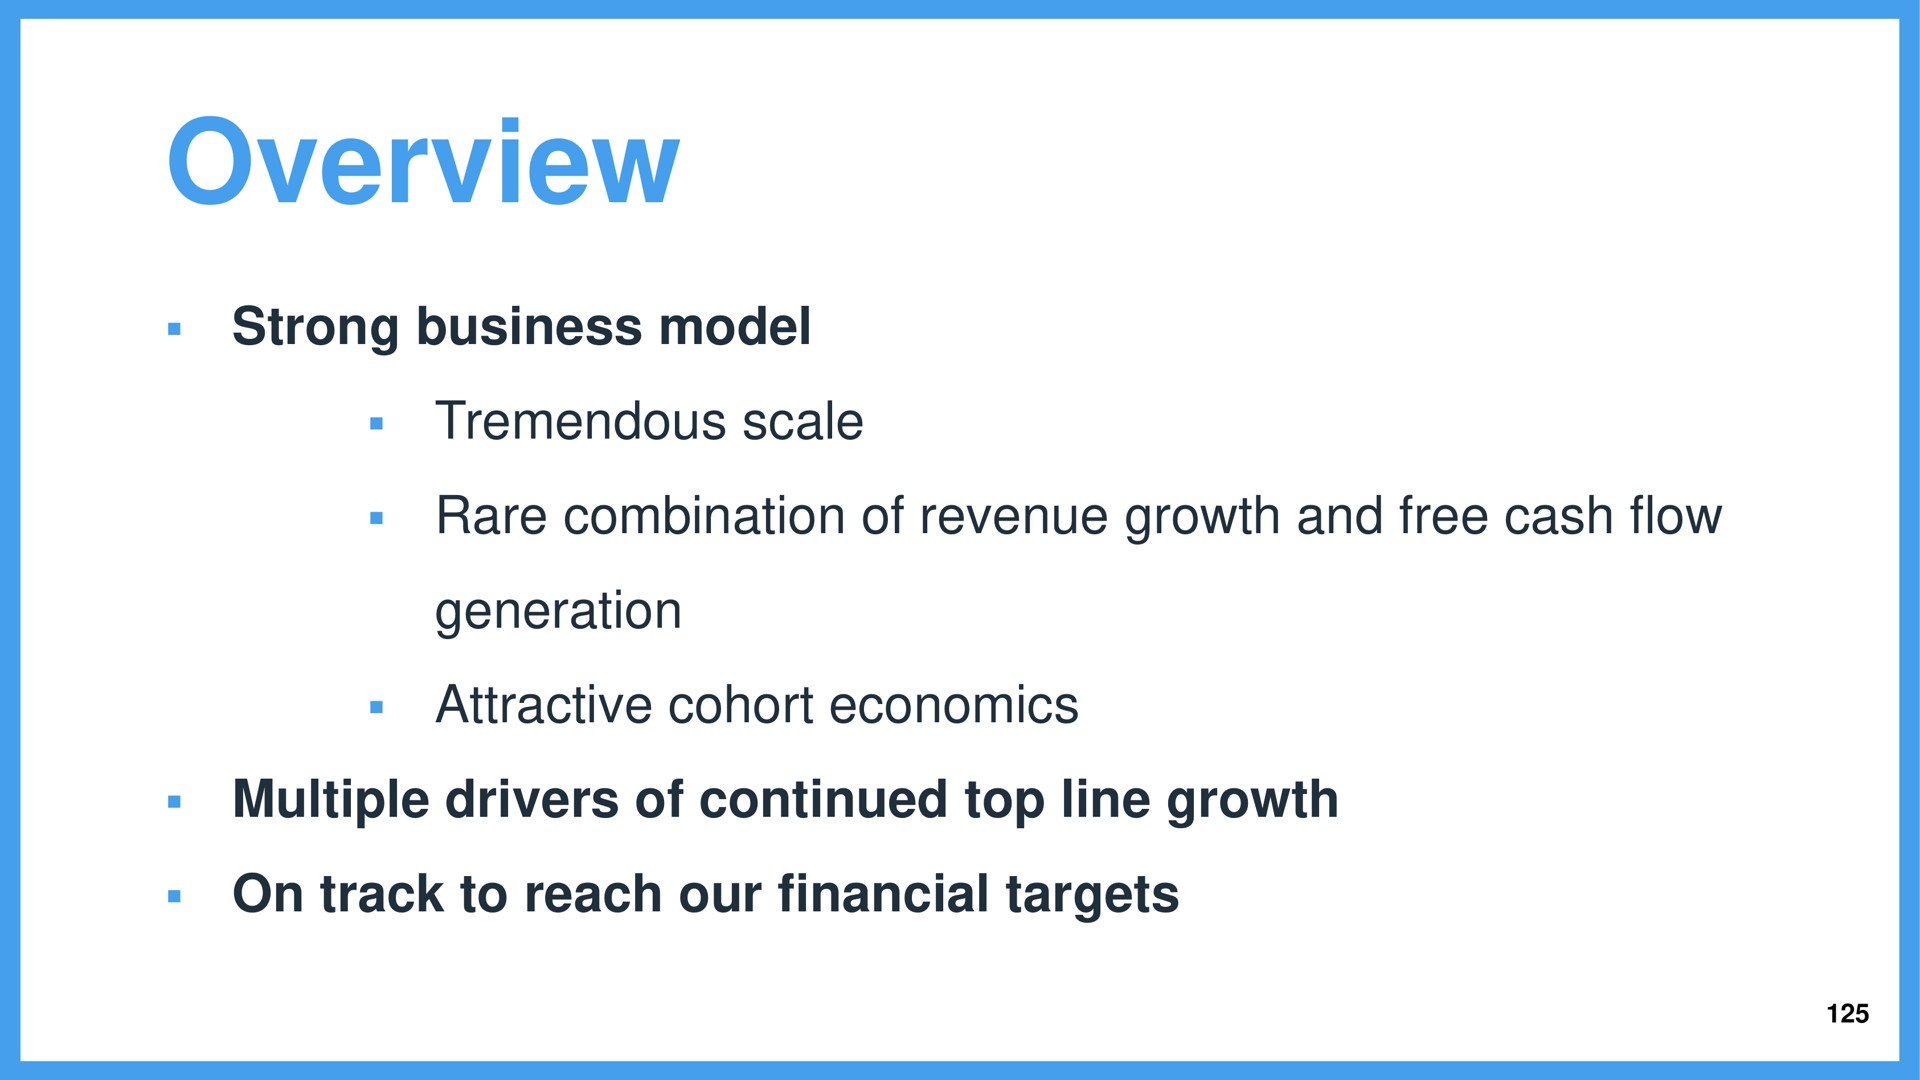 overview strong business model tremendous scale attractive cohort economics on track to reach our financial targets multiple drivers of continued top line growth | Wix